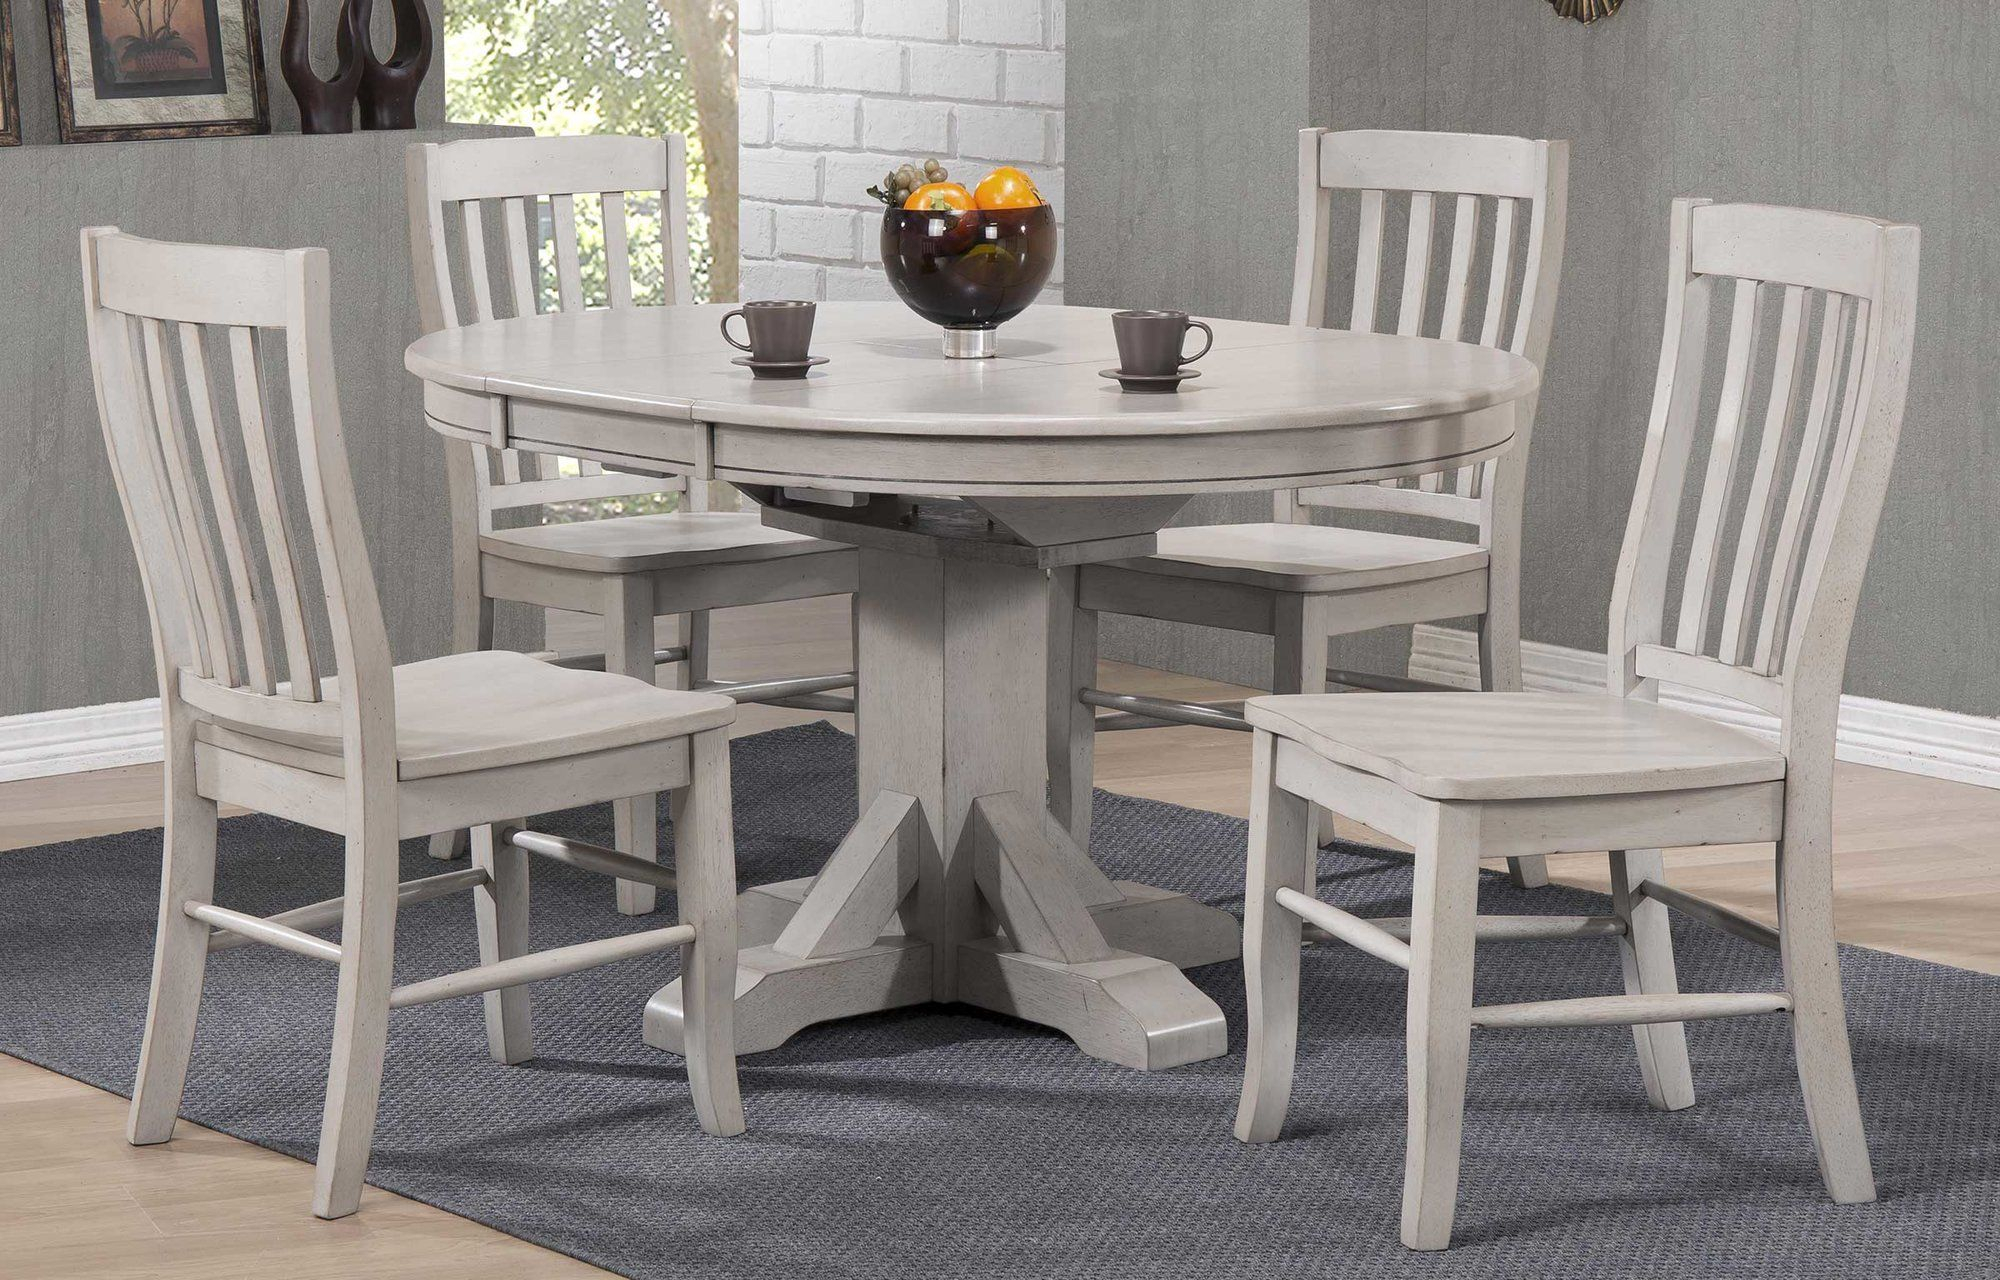 Rutledge Pedestal Extendable Solid Wood Dining Table pertaining to dimensions 2000 X 1280